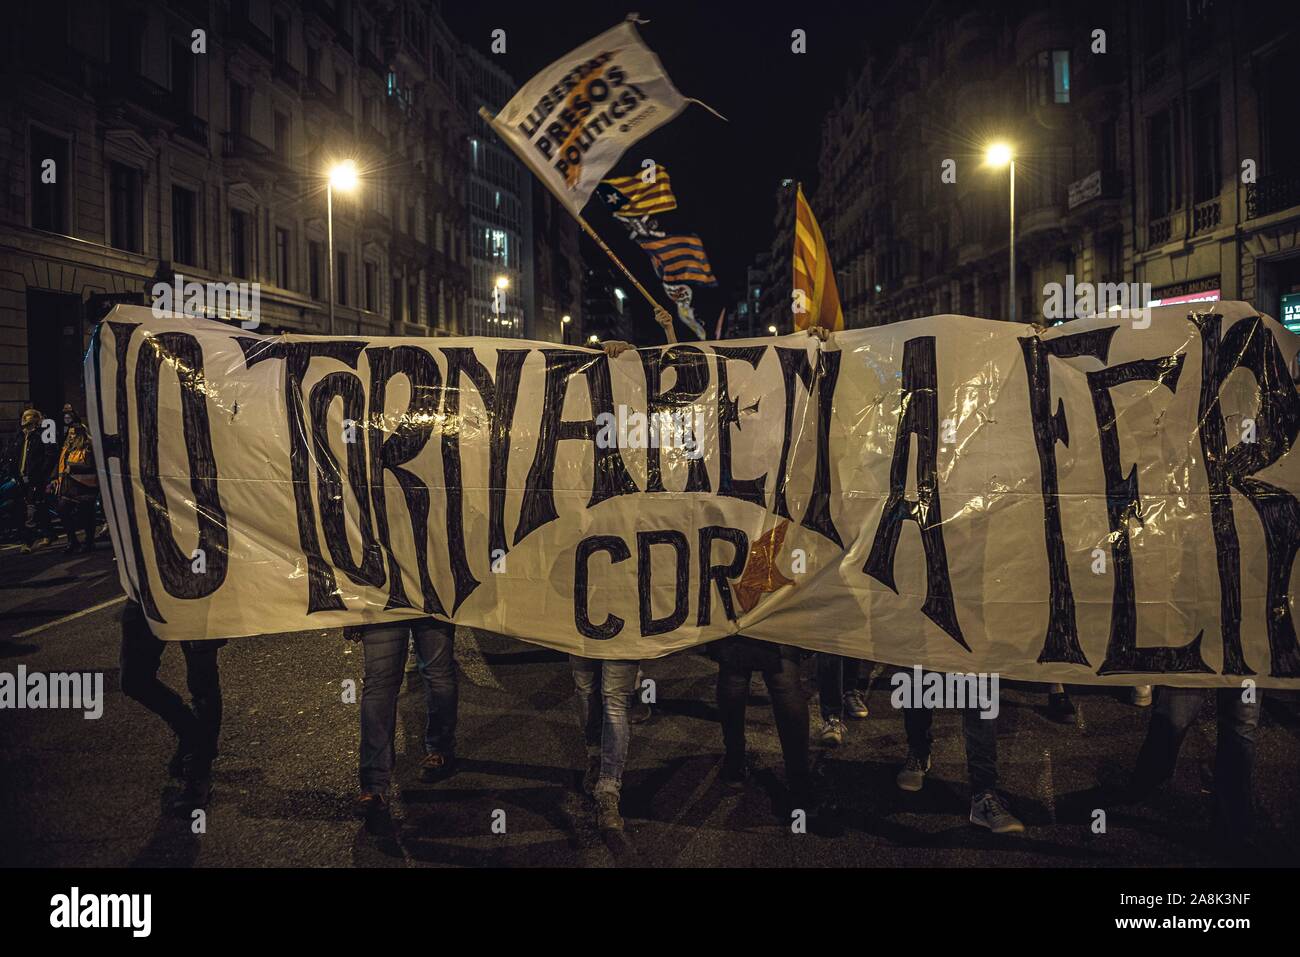 Barcelona, Spain. 9 November, 2019:  Members of Barcelona's CDR (Committee for the Defense of the Republic) march behind their banner reading 'we will do it again' protesting the Supreme Court's verdict against 9 Catalan leaders over their role in a banned referendum on secession in October 2017 as an act of civil disobedience against the central electoral commission during election silence the day before a general election. Stock Photo